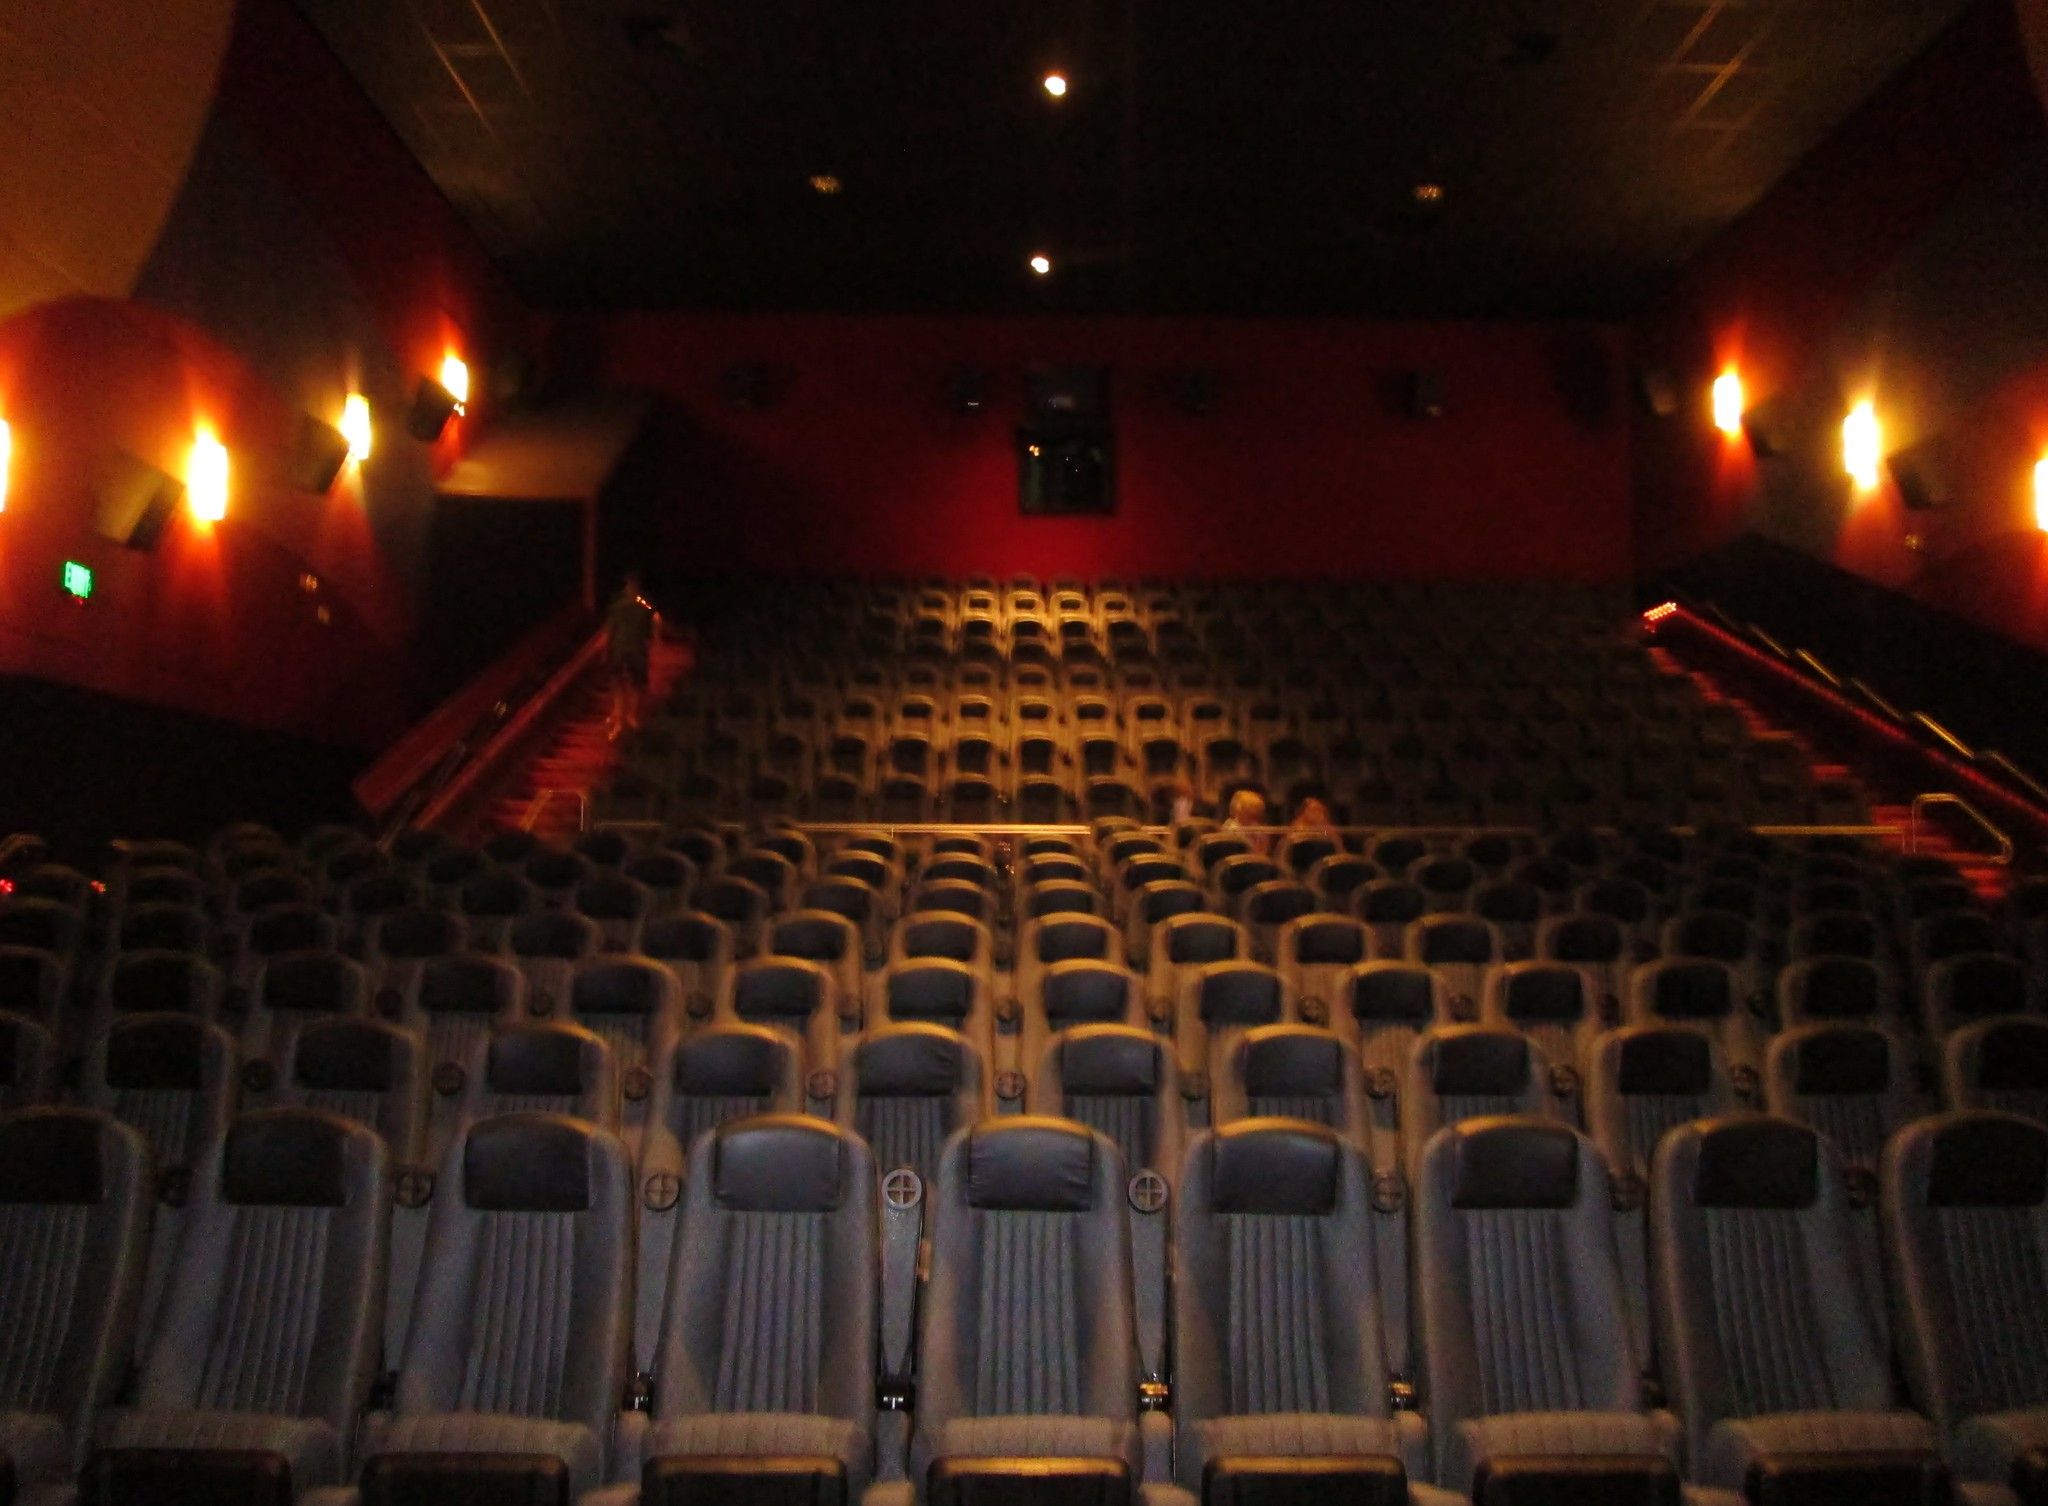 View from inside of a movie theater.